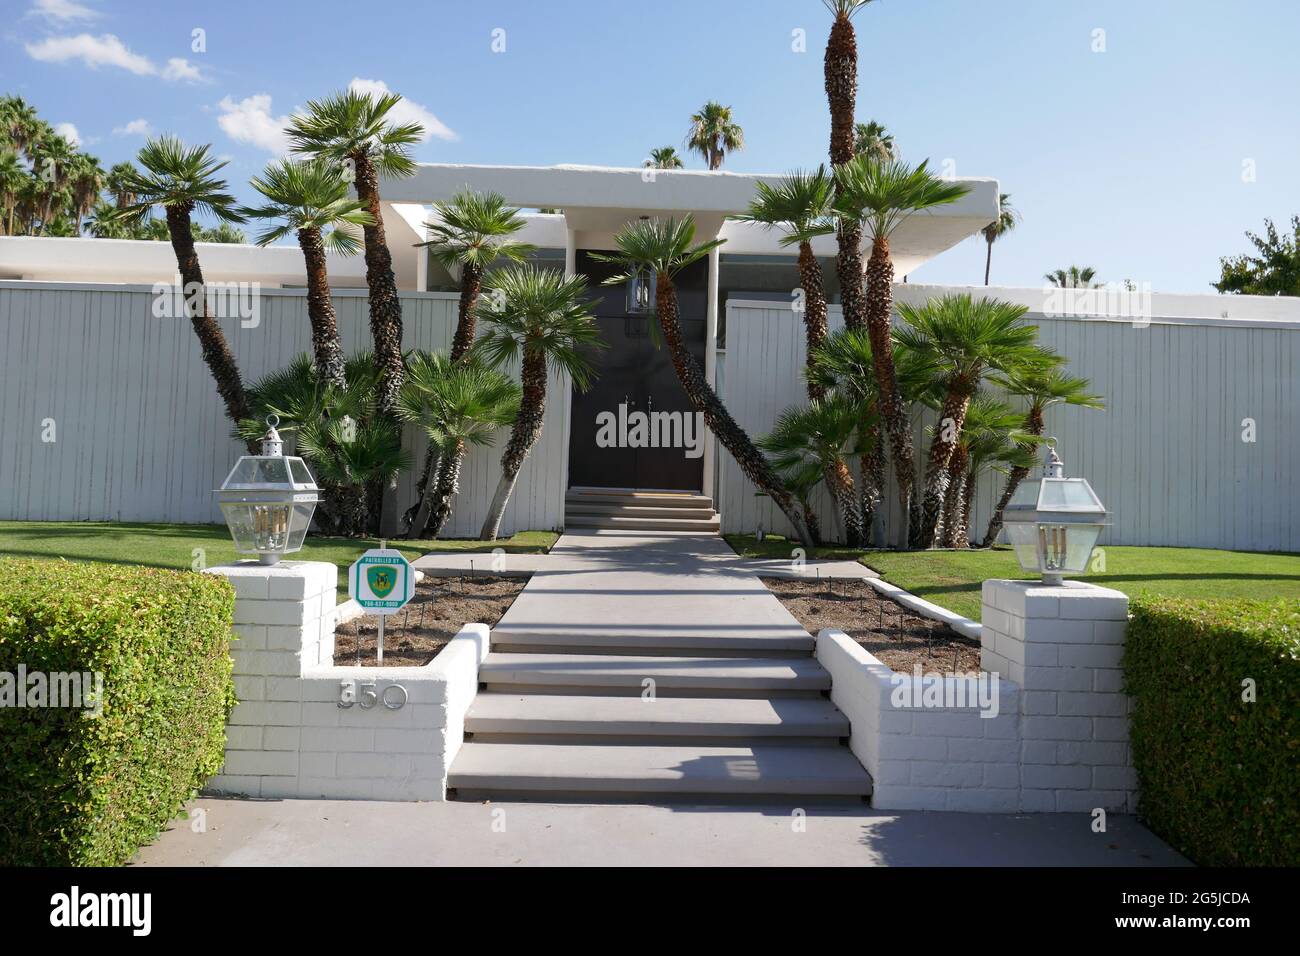 Palm Springs, California, USA 24th June 2021 A general view of atmosphere of actress Goldie Hawn and actor Kurt Russell's former home/house at 550 Via Lola on June 24, 2021 in Palm Springs, California, USA. Photo by Barry King/Alamy Stock Photo Stock Photo